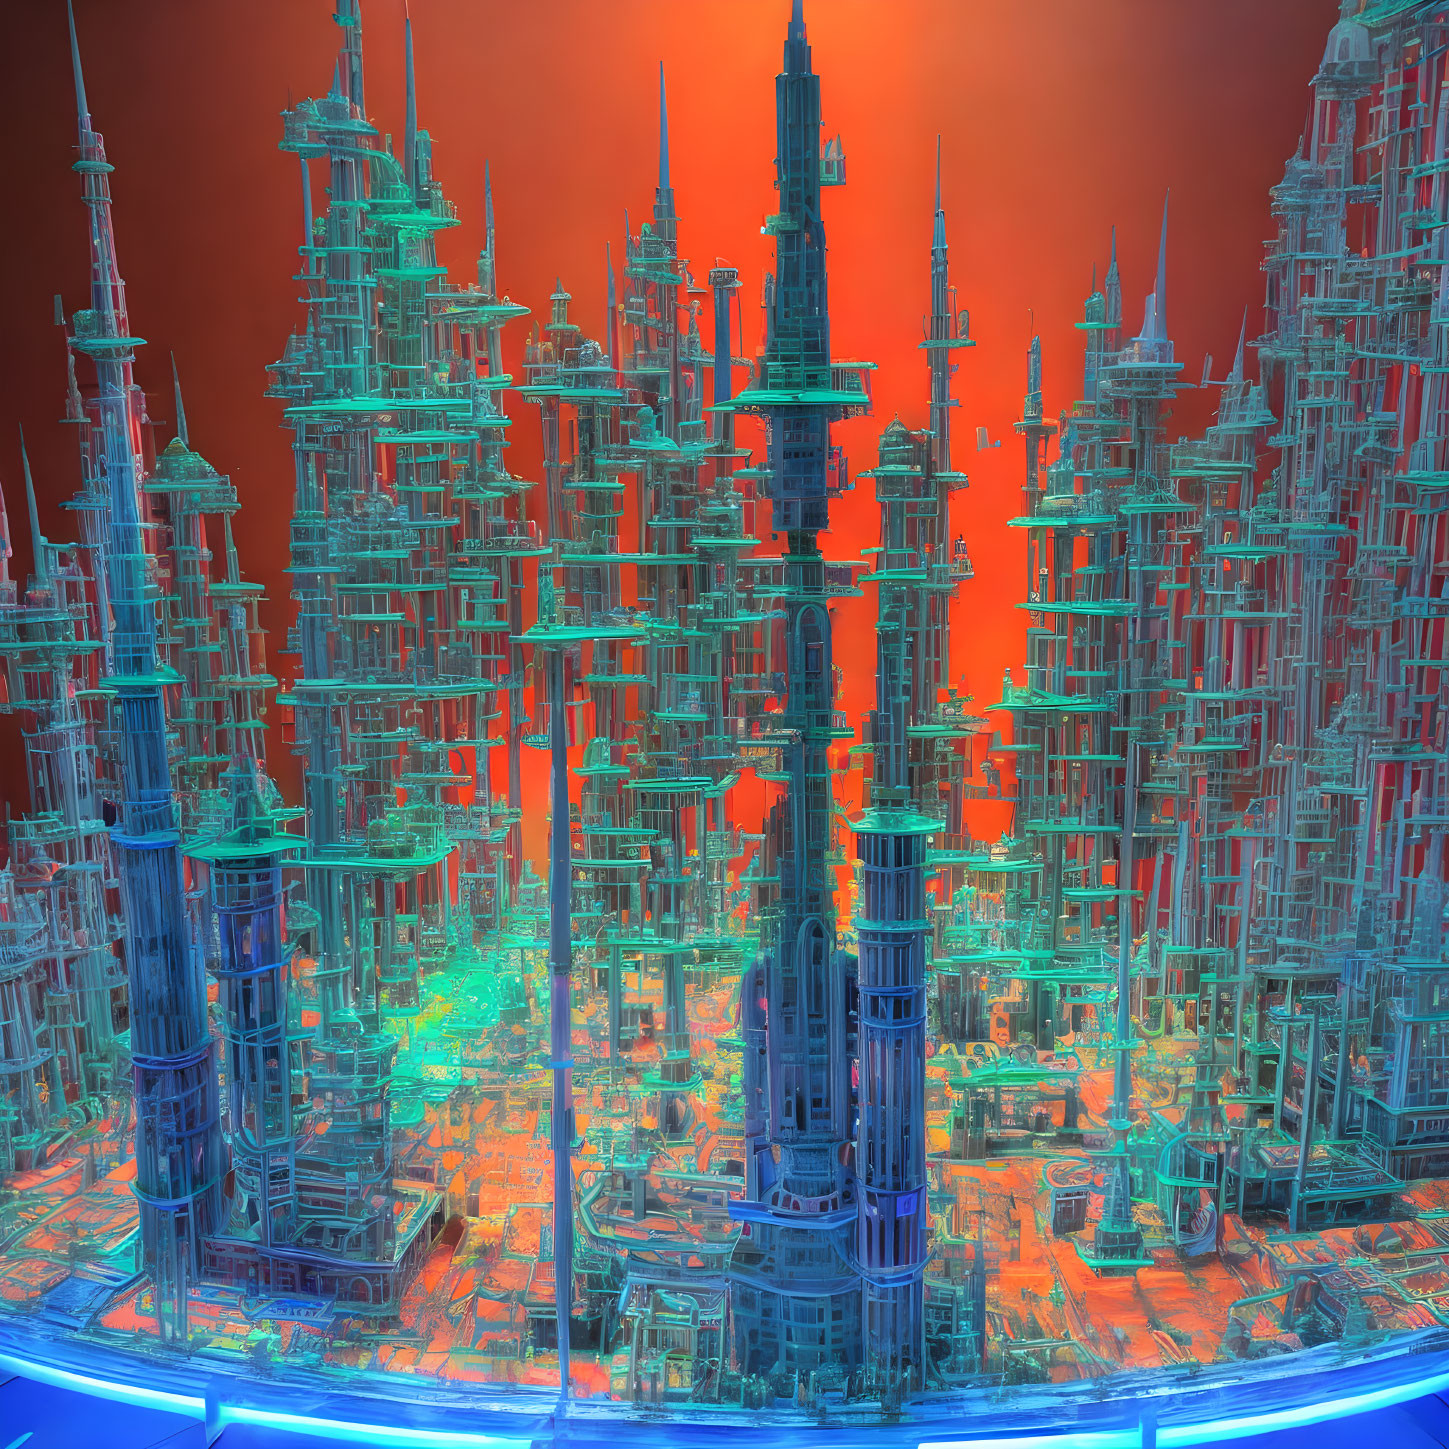 Futuristic cityscape with intricate skyscrapers in blue and orange hues